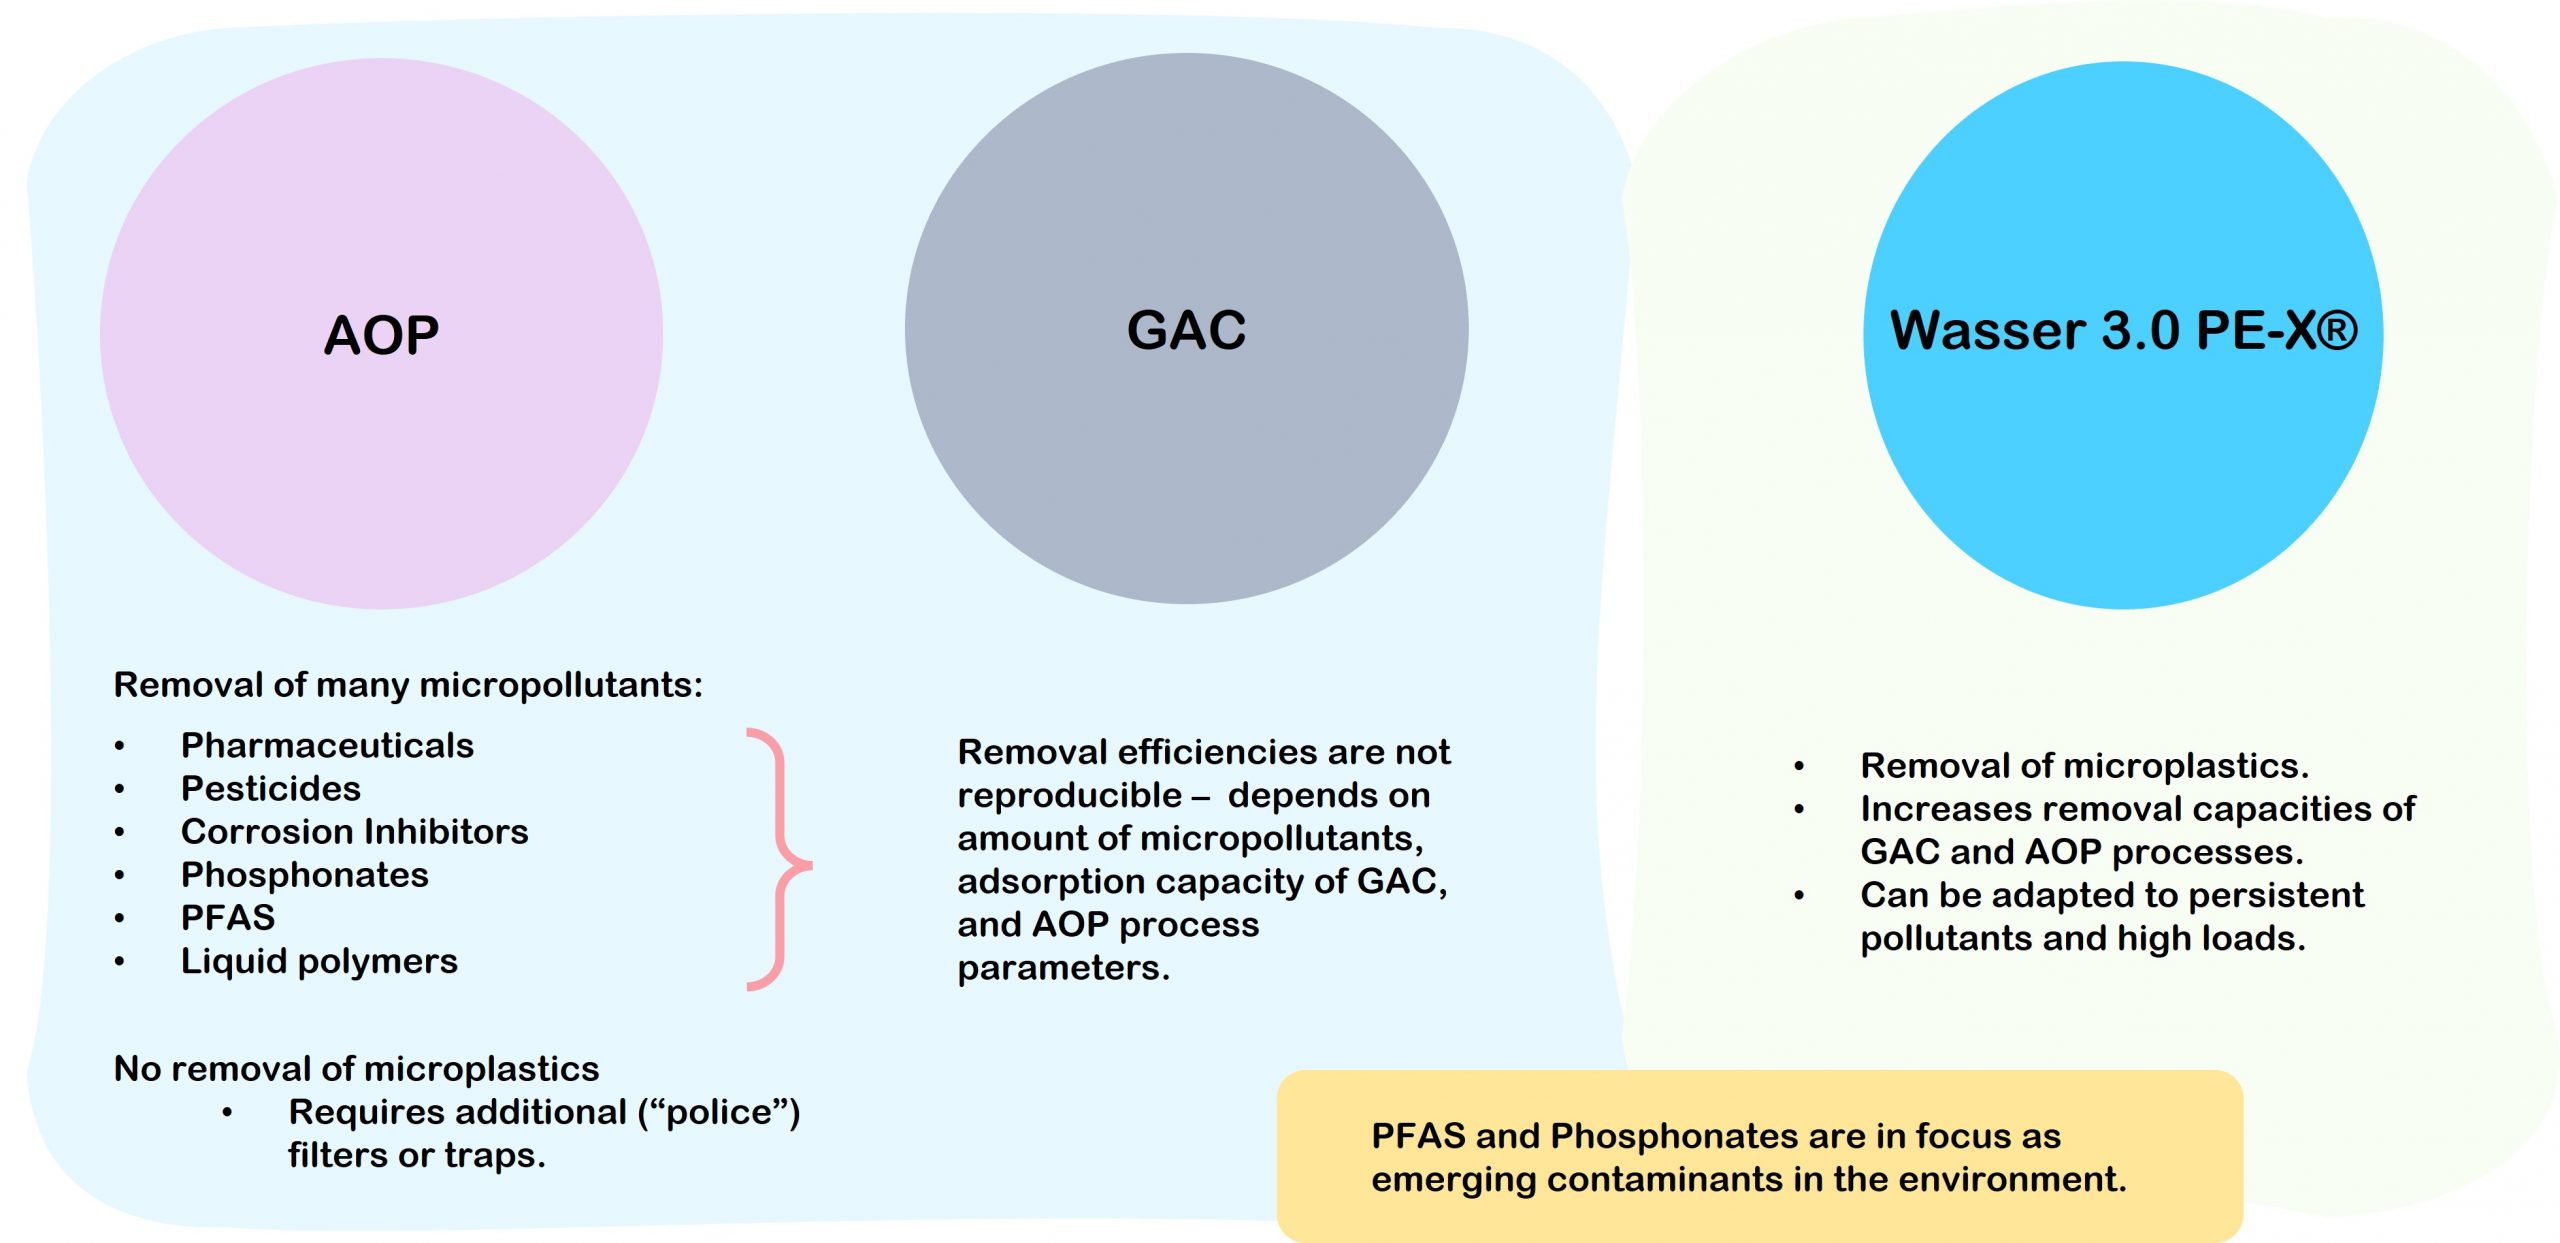 Overview of application possibilities of GAC, AOP, and Wasser 3.0 PE-X®.